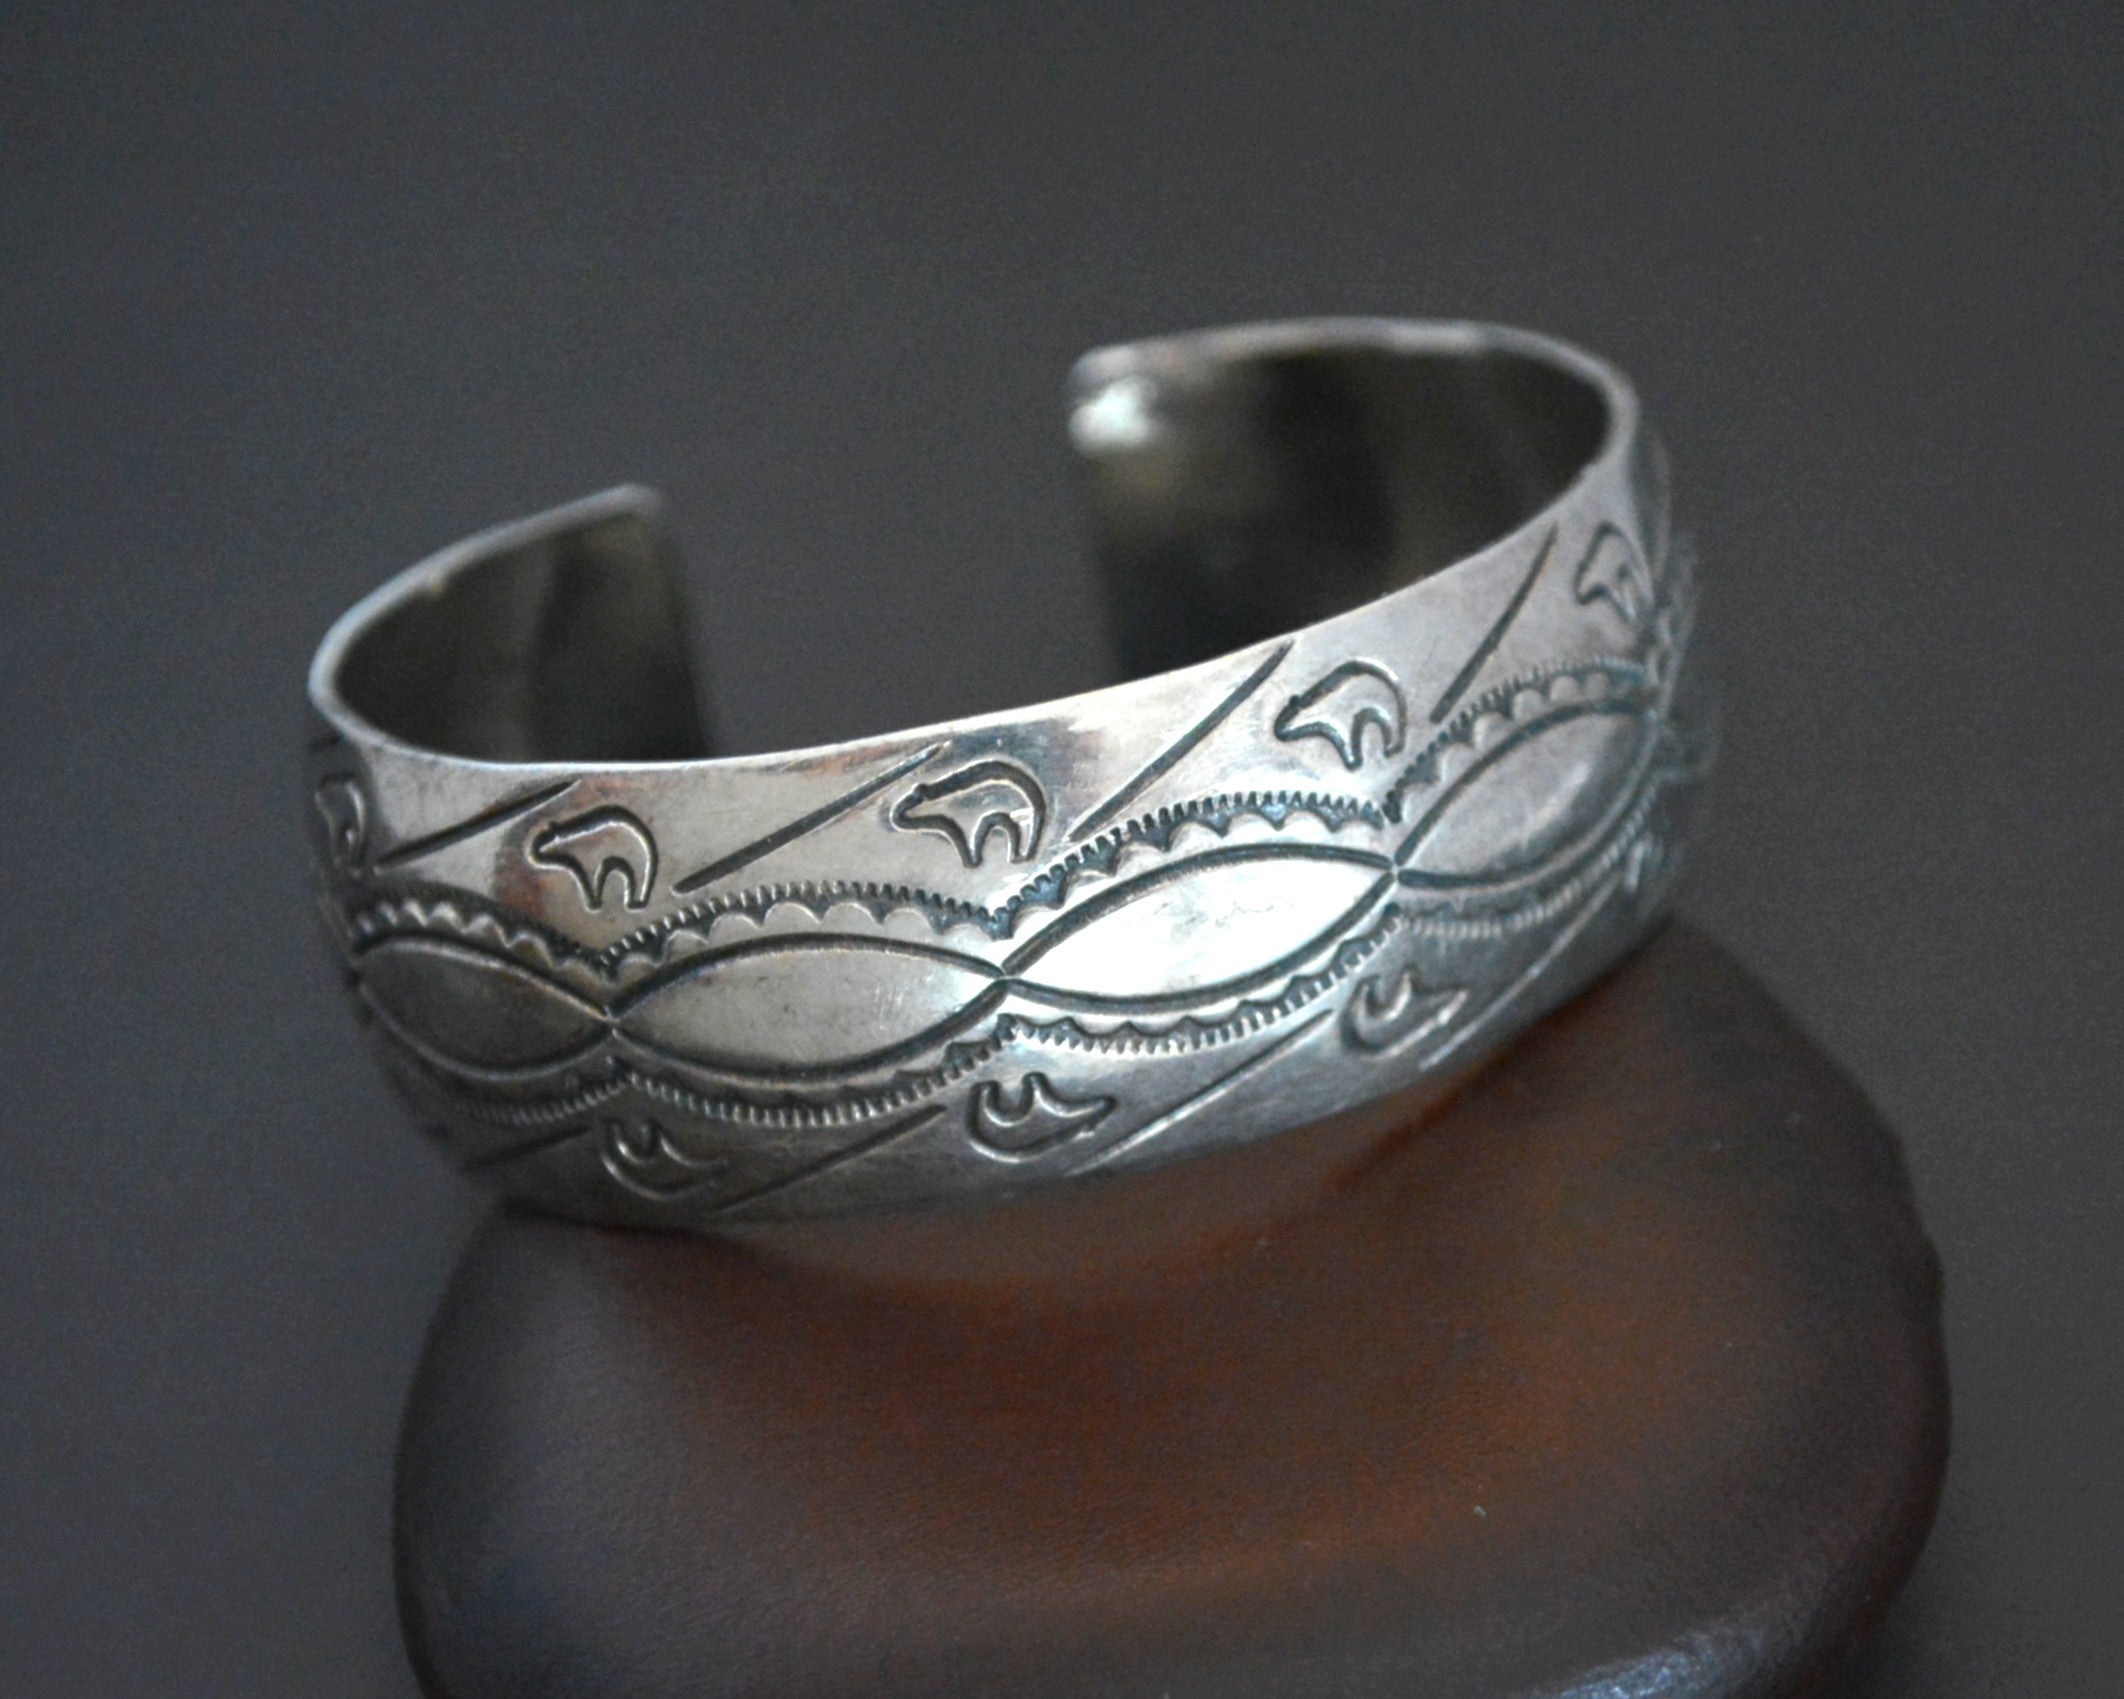 Navajo Stamped Sterling Silver Cuff Bracelet - SMALL